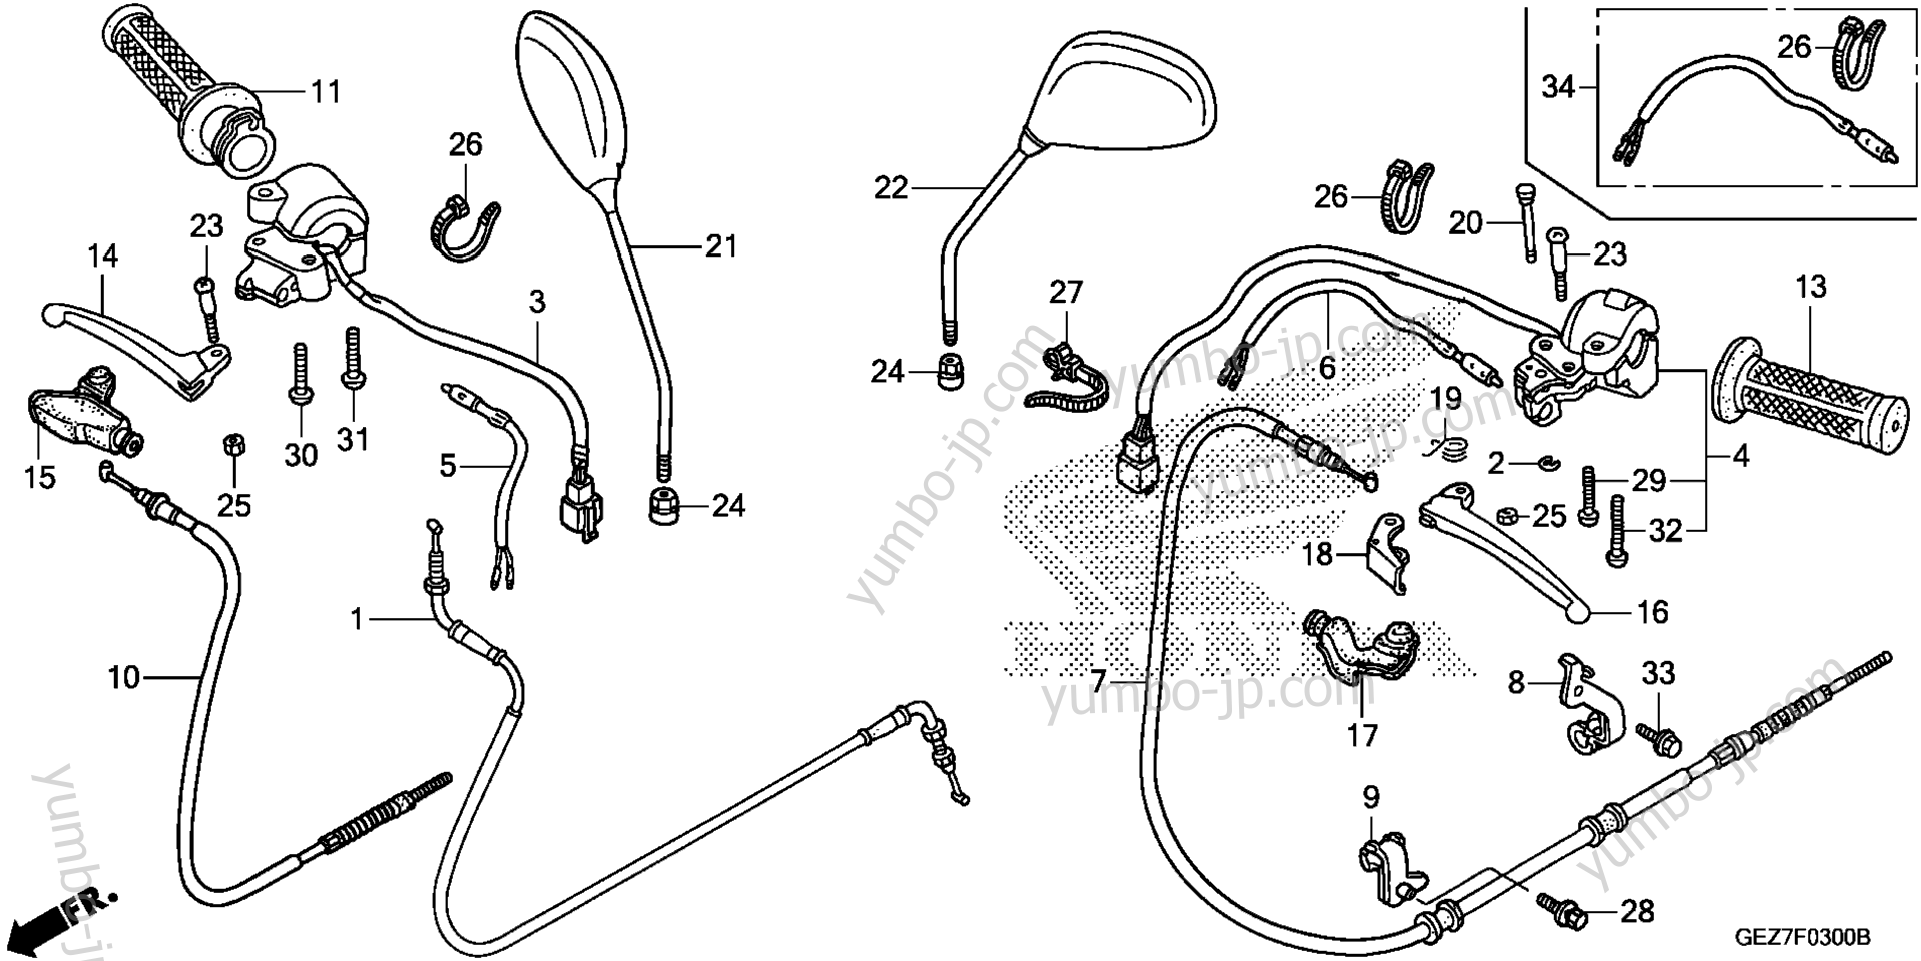 HANDLE LEVER / SWITCH / CABLE for scooters HONDA NPS50S A 2009 year